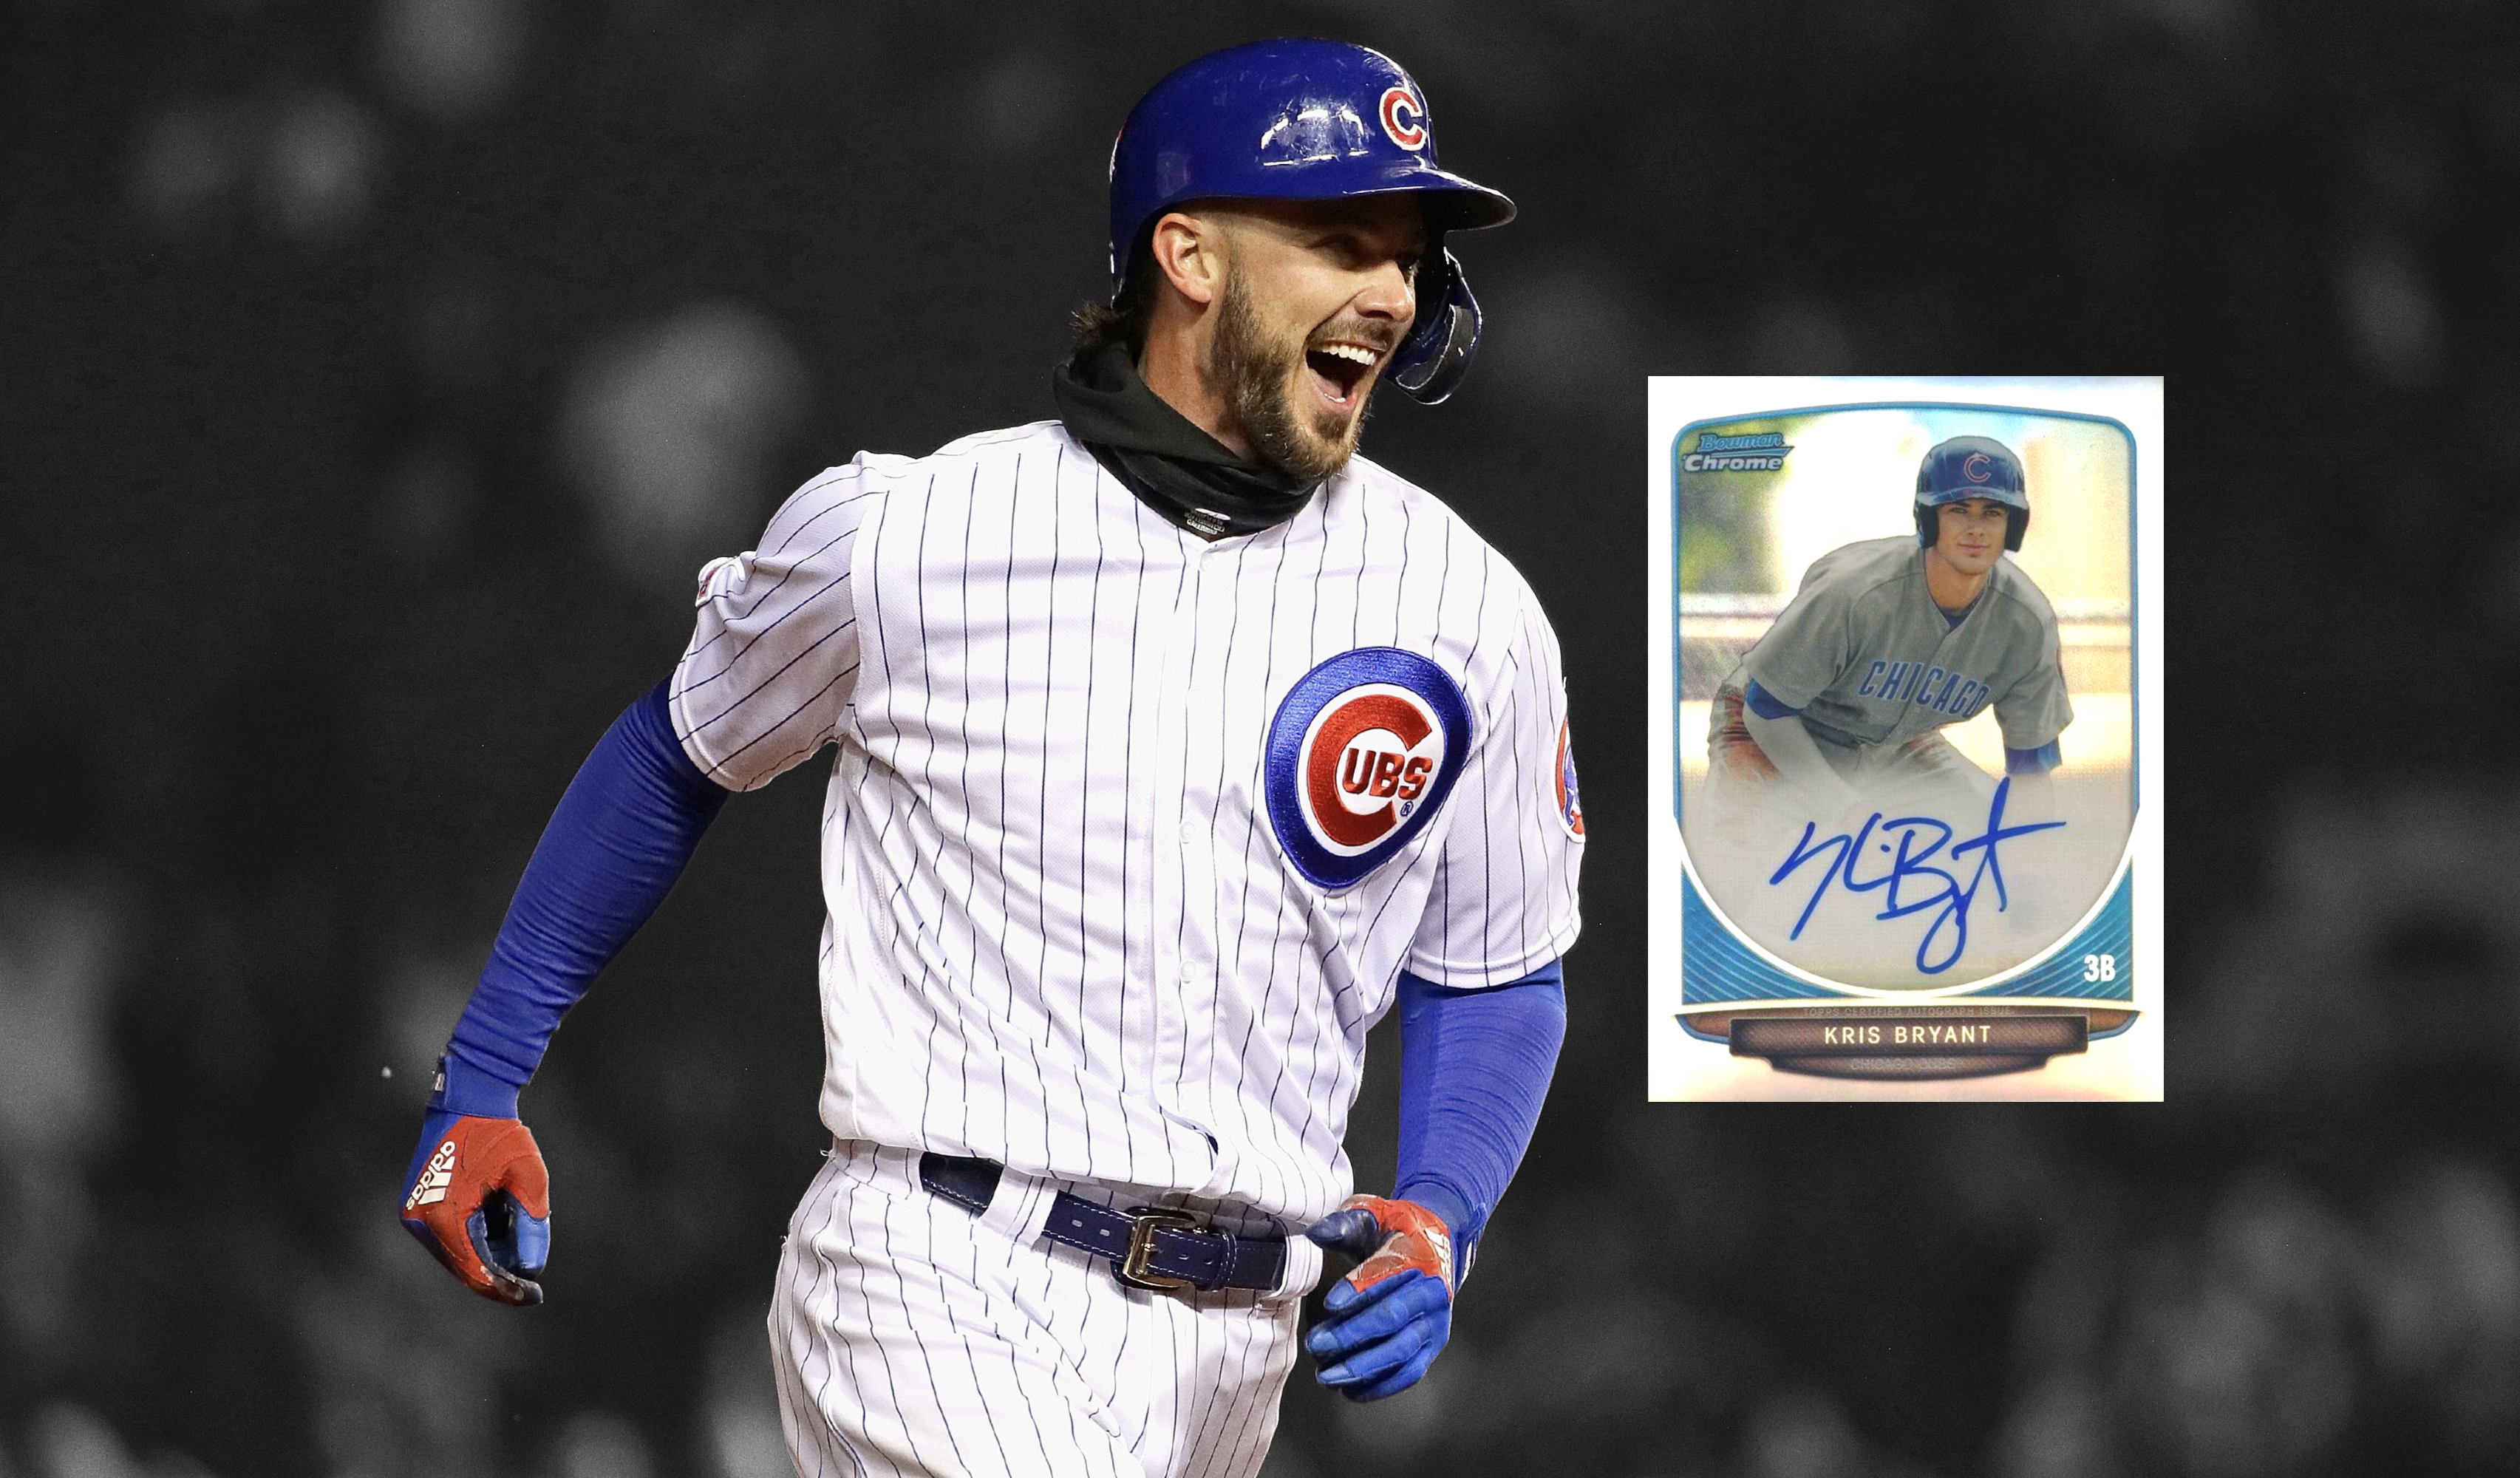 Kris Bryant Autographed Chicago Cubs Jersey W/PROOF, Picture of Kris  Signing For Us, Chicago Cubs, Top Prospect at 's Sports Collectibles  Store